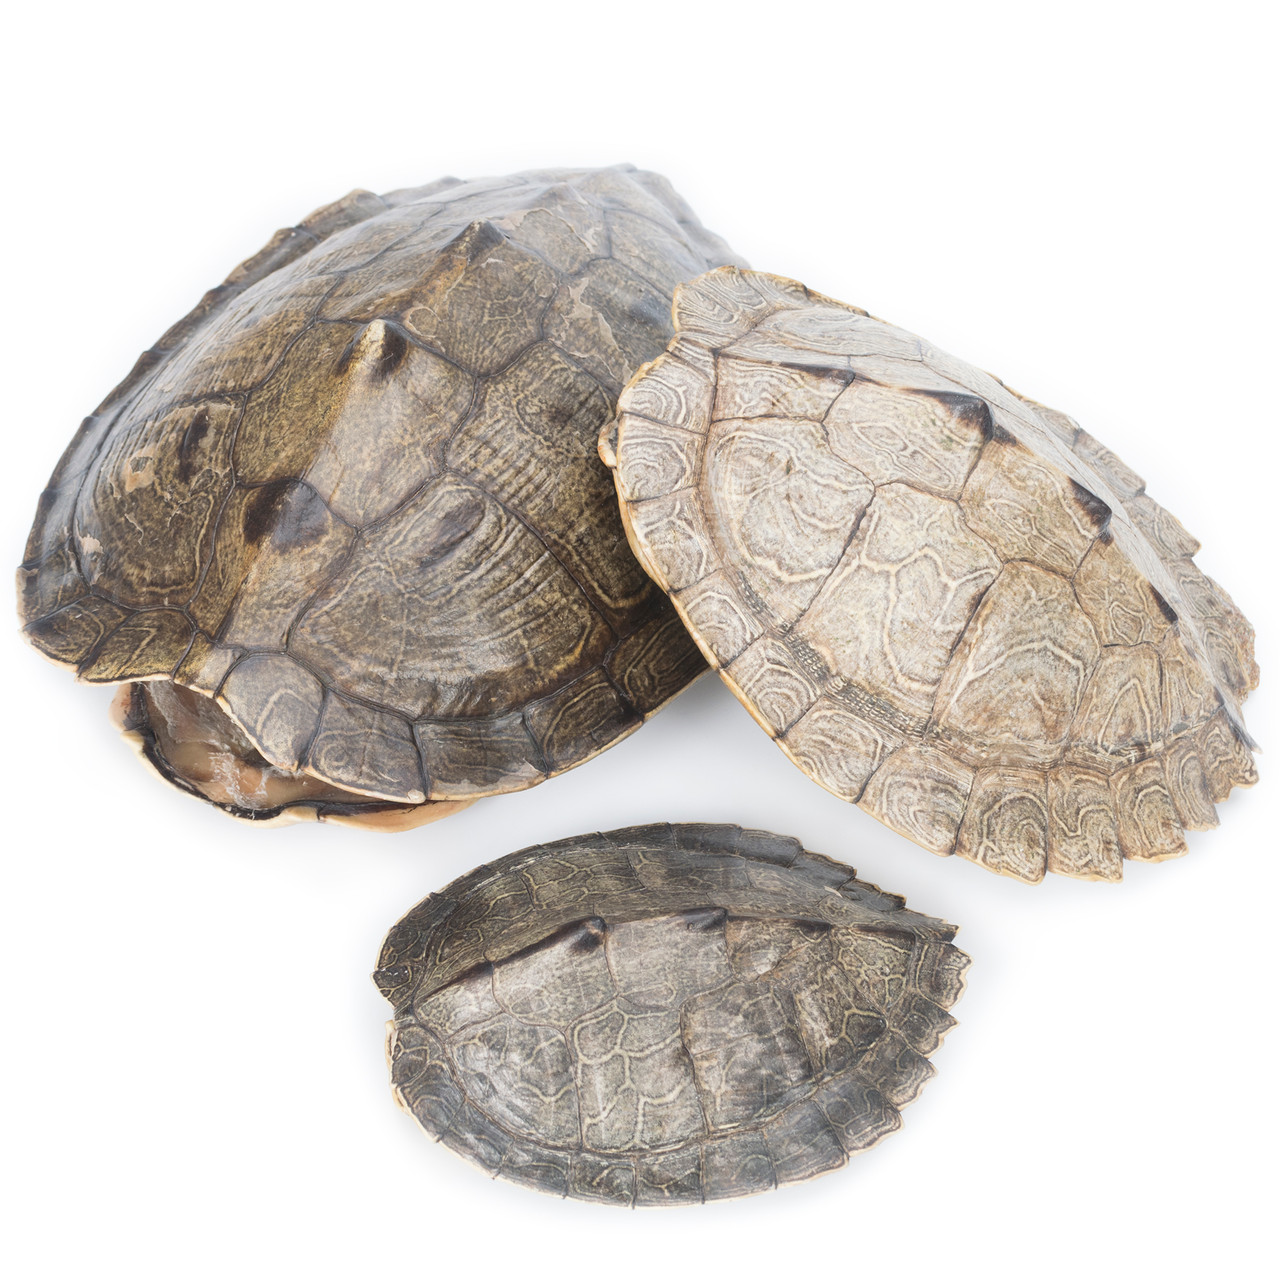 Real Turtle Shell Red Eared Slider 5-6 inch Long Carapace Taxidermy